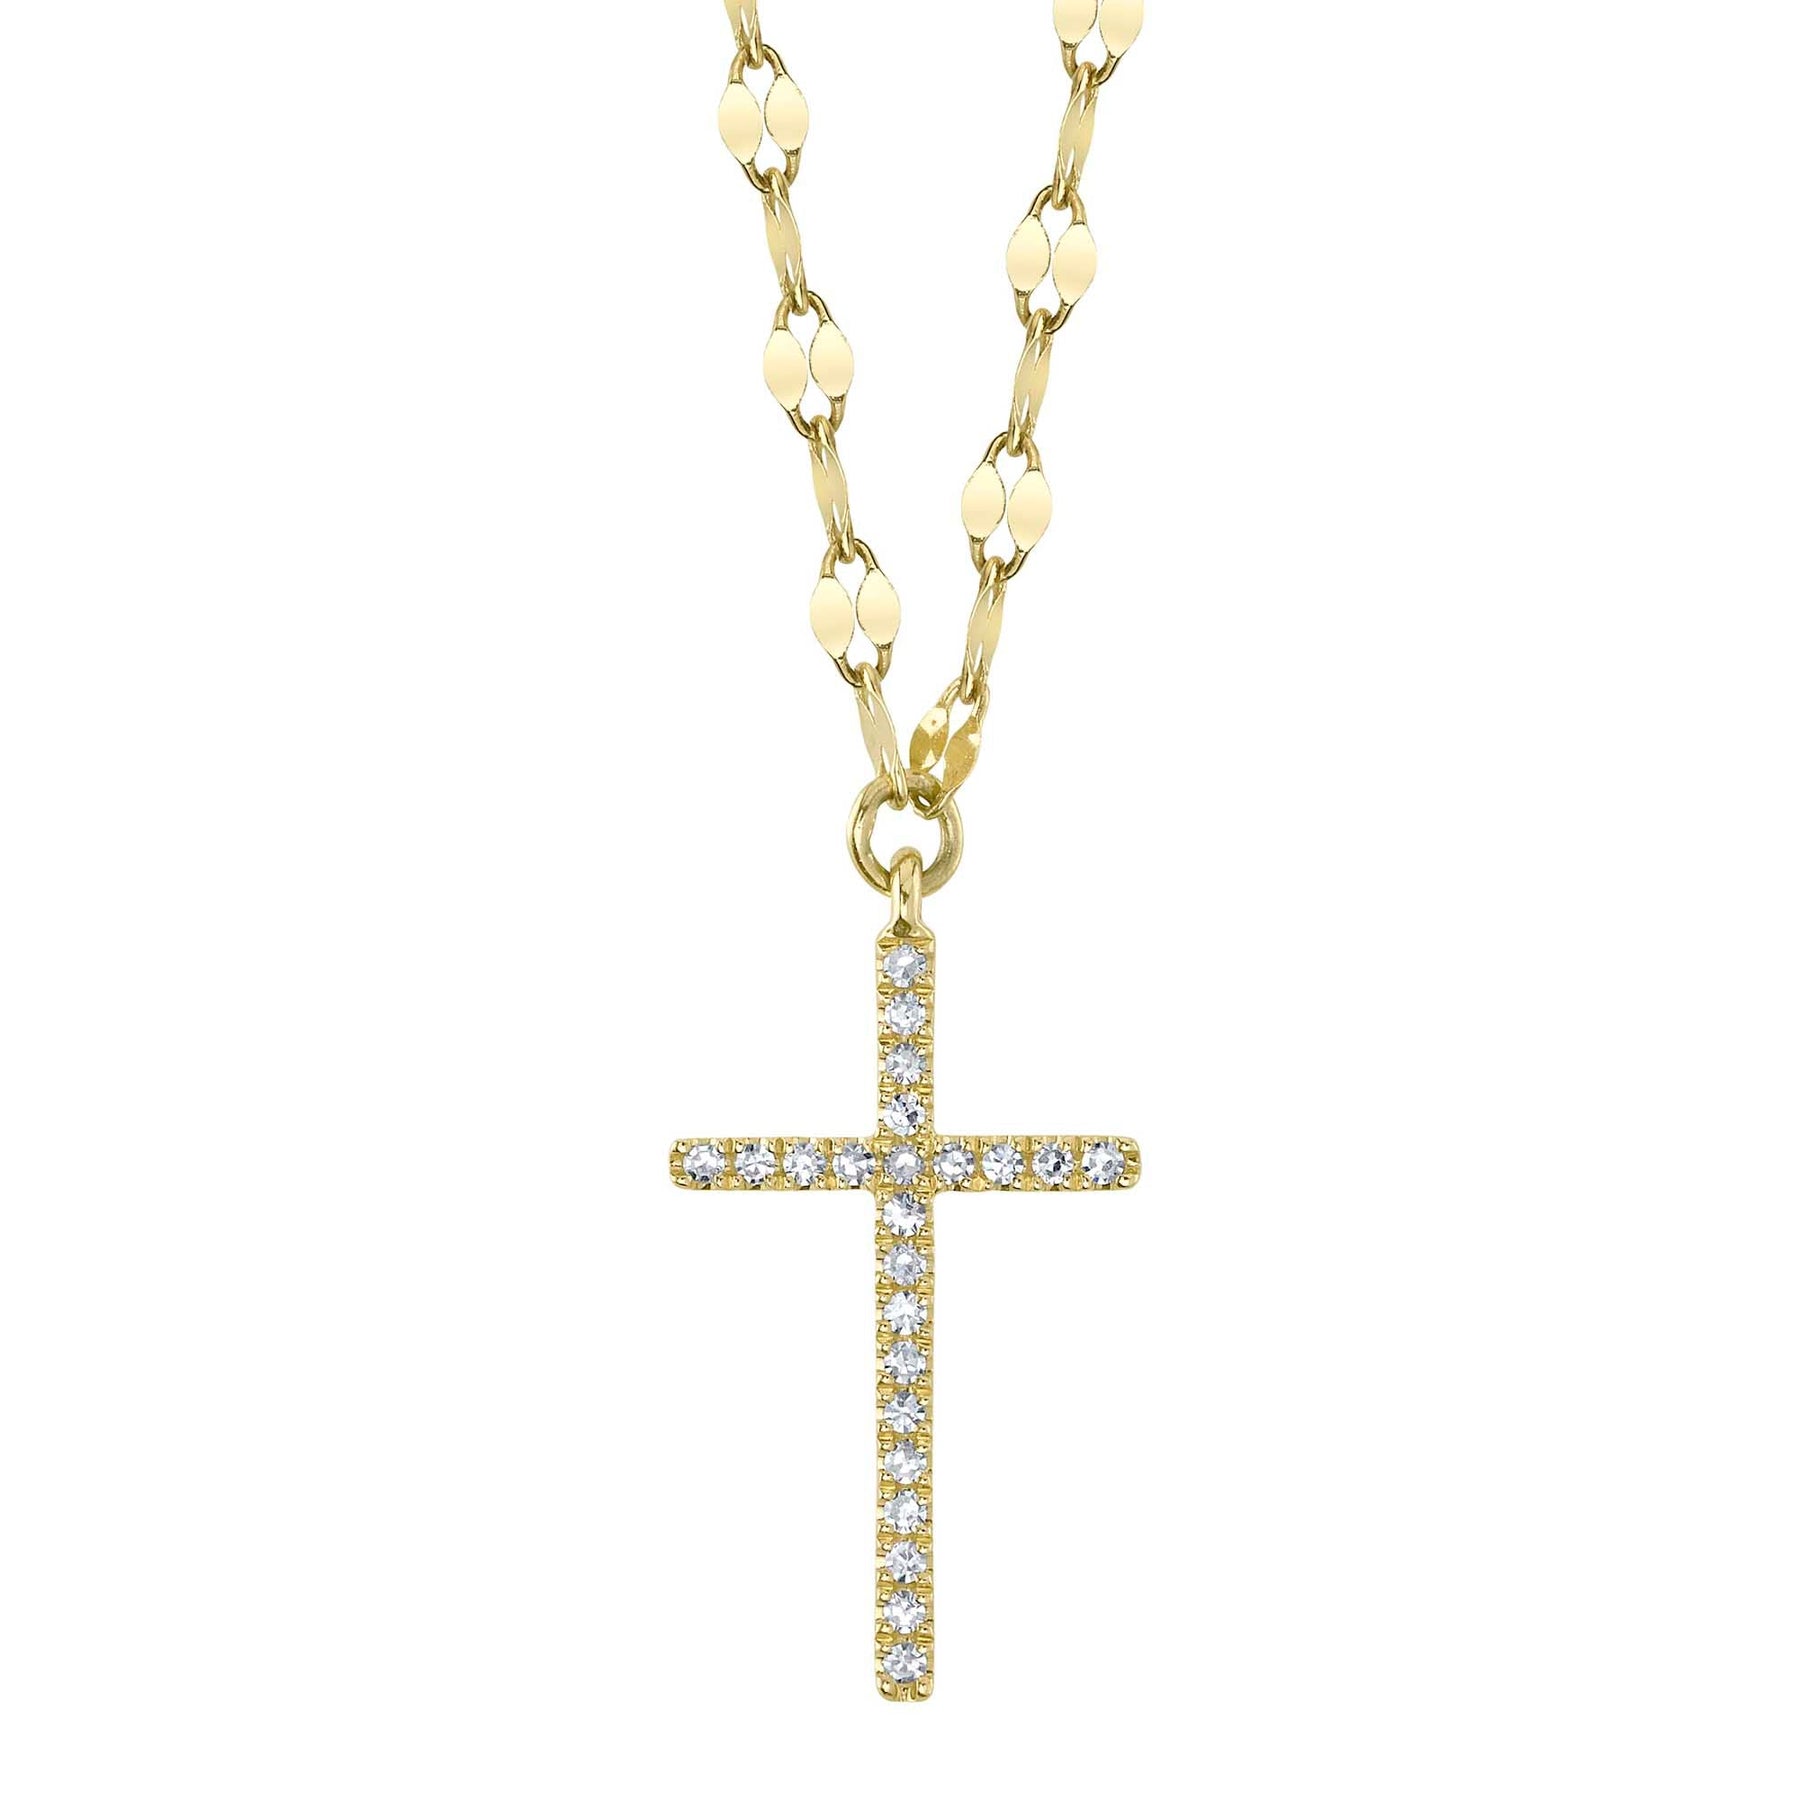 Buy Aunt Joan of Arc Gift: White Gold Dipped Christian Cross Necklace for  Your Loving Auntie, Aunty, or Aunt-in-law Online in India - Etsy